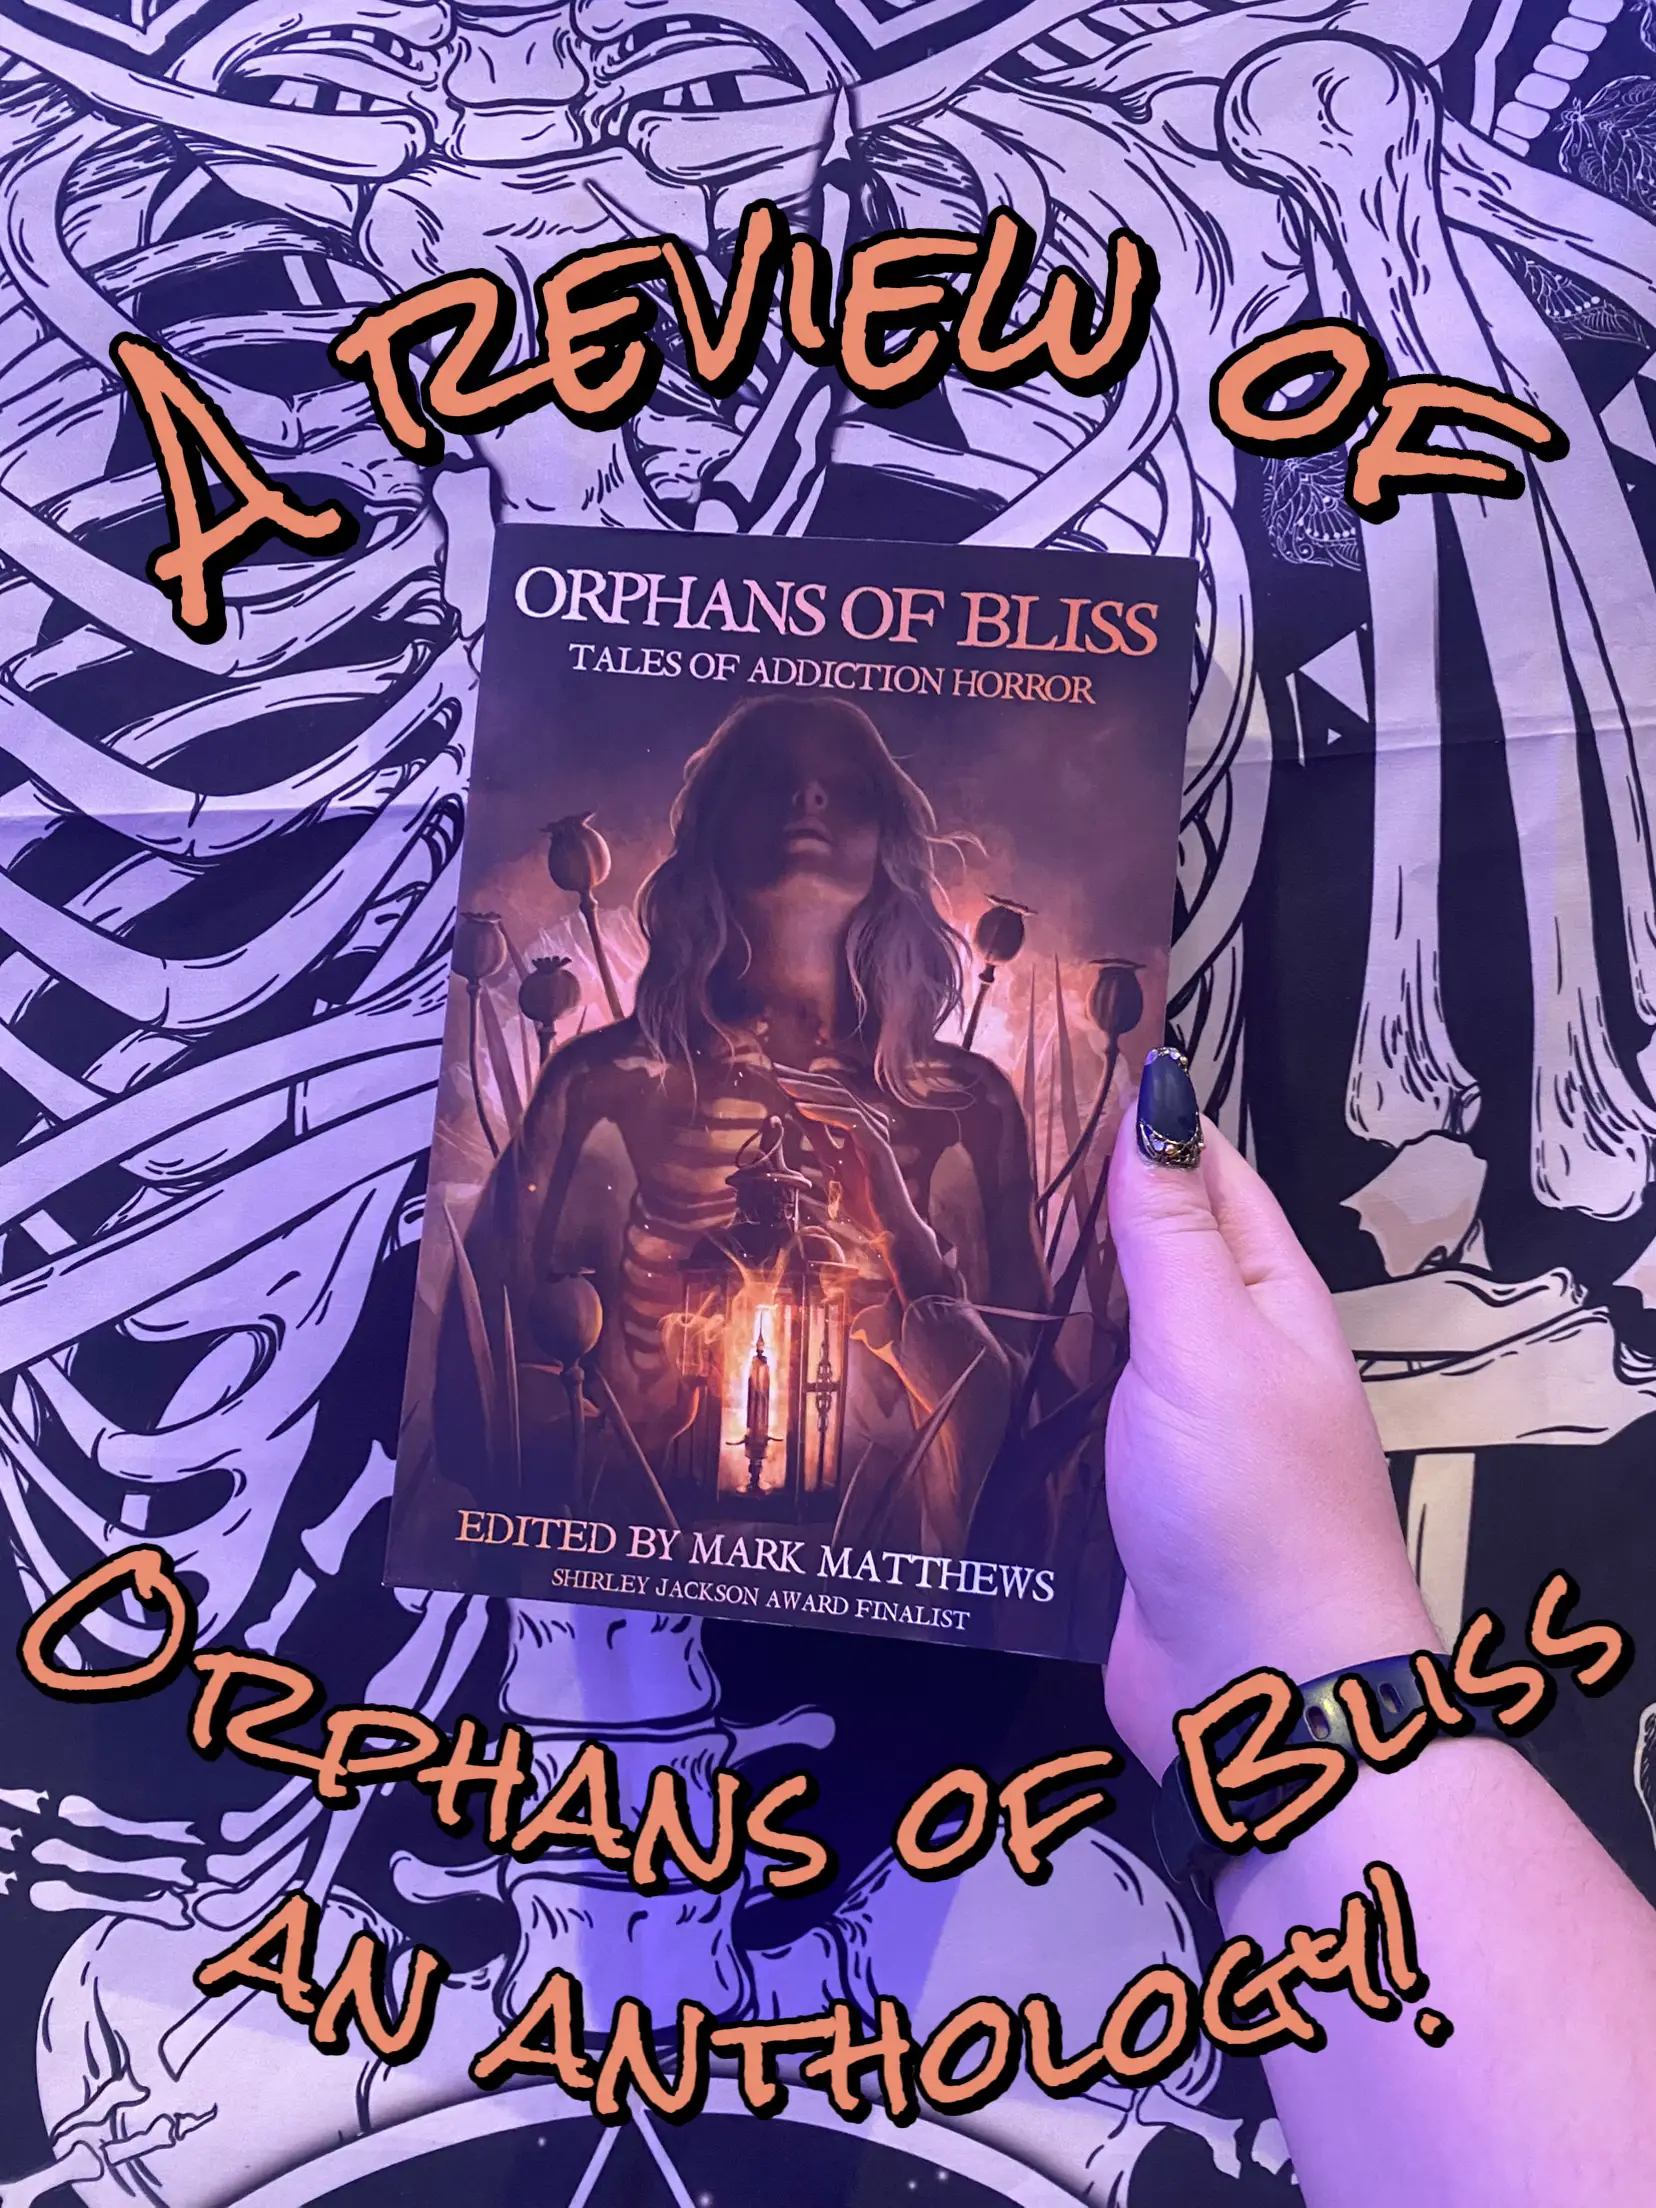 Orphans of Bliss: Tales of Addiction Horror by Mark Matthews